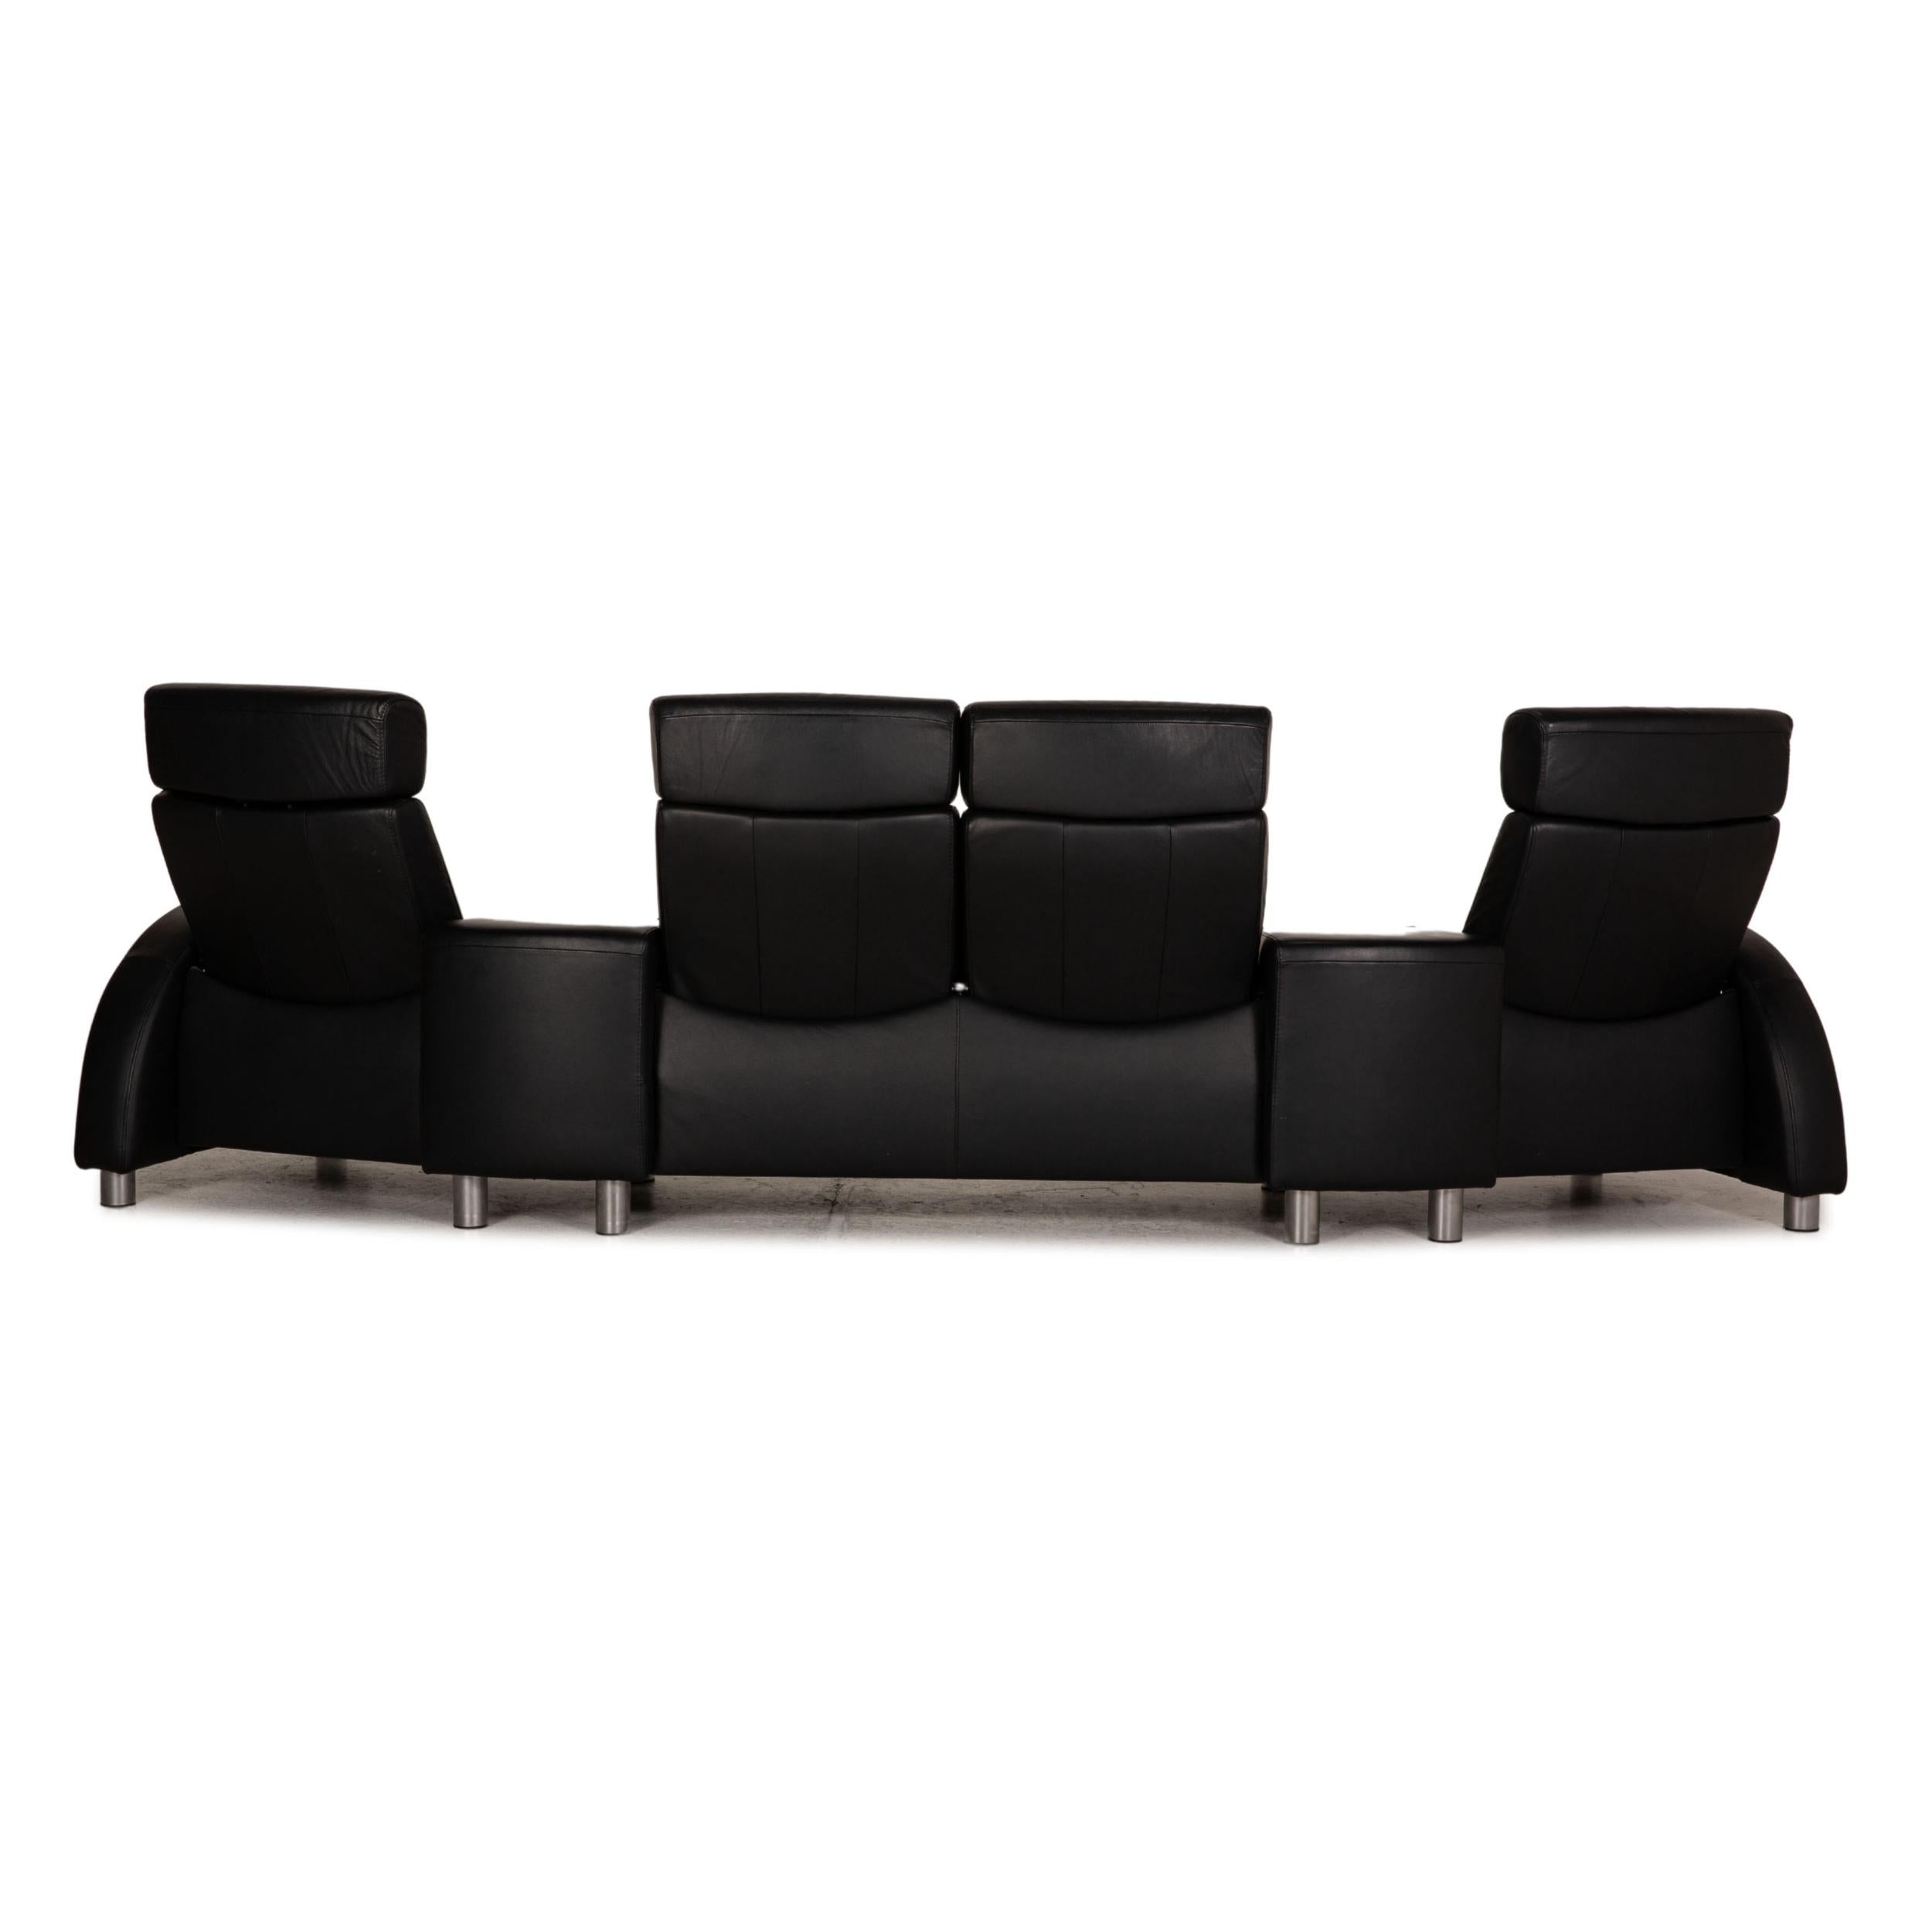 Stressless Arion Leather Sofa Black Four Seater Couch Feature For Sale 6